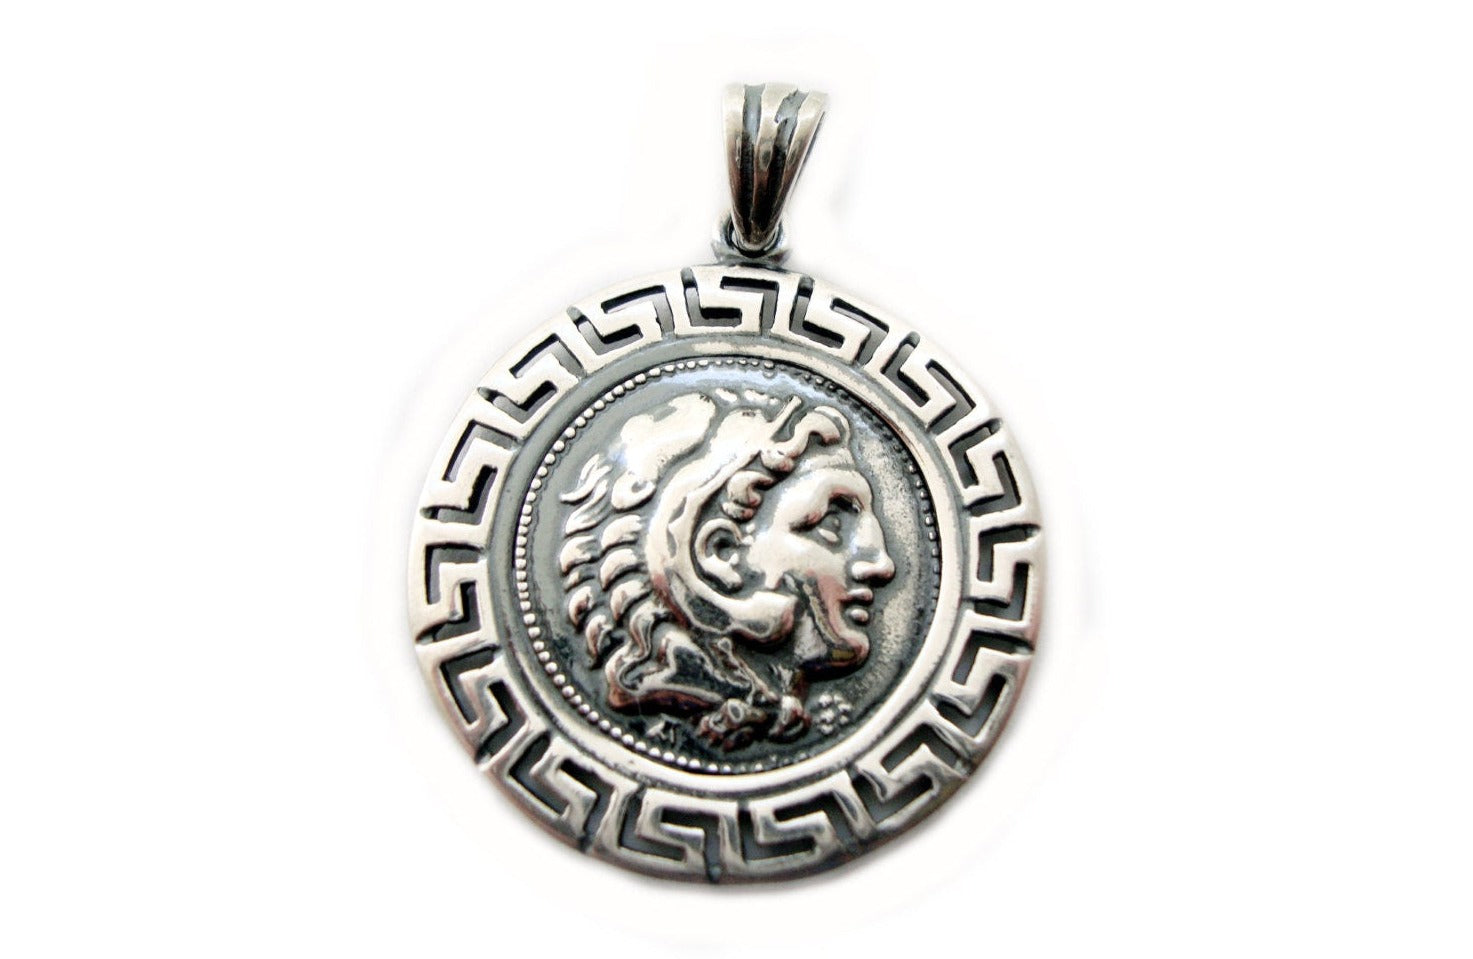 Handcrafted Sterling Silver 925 Pendant featuring an Alexander the Great coin within a Greek Key Meandros frame. Diameter: 29mm. Made in Greece.